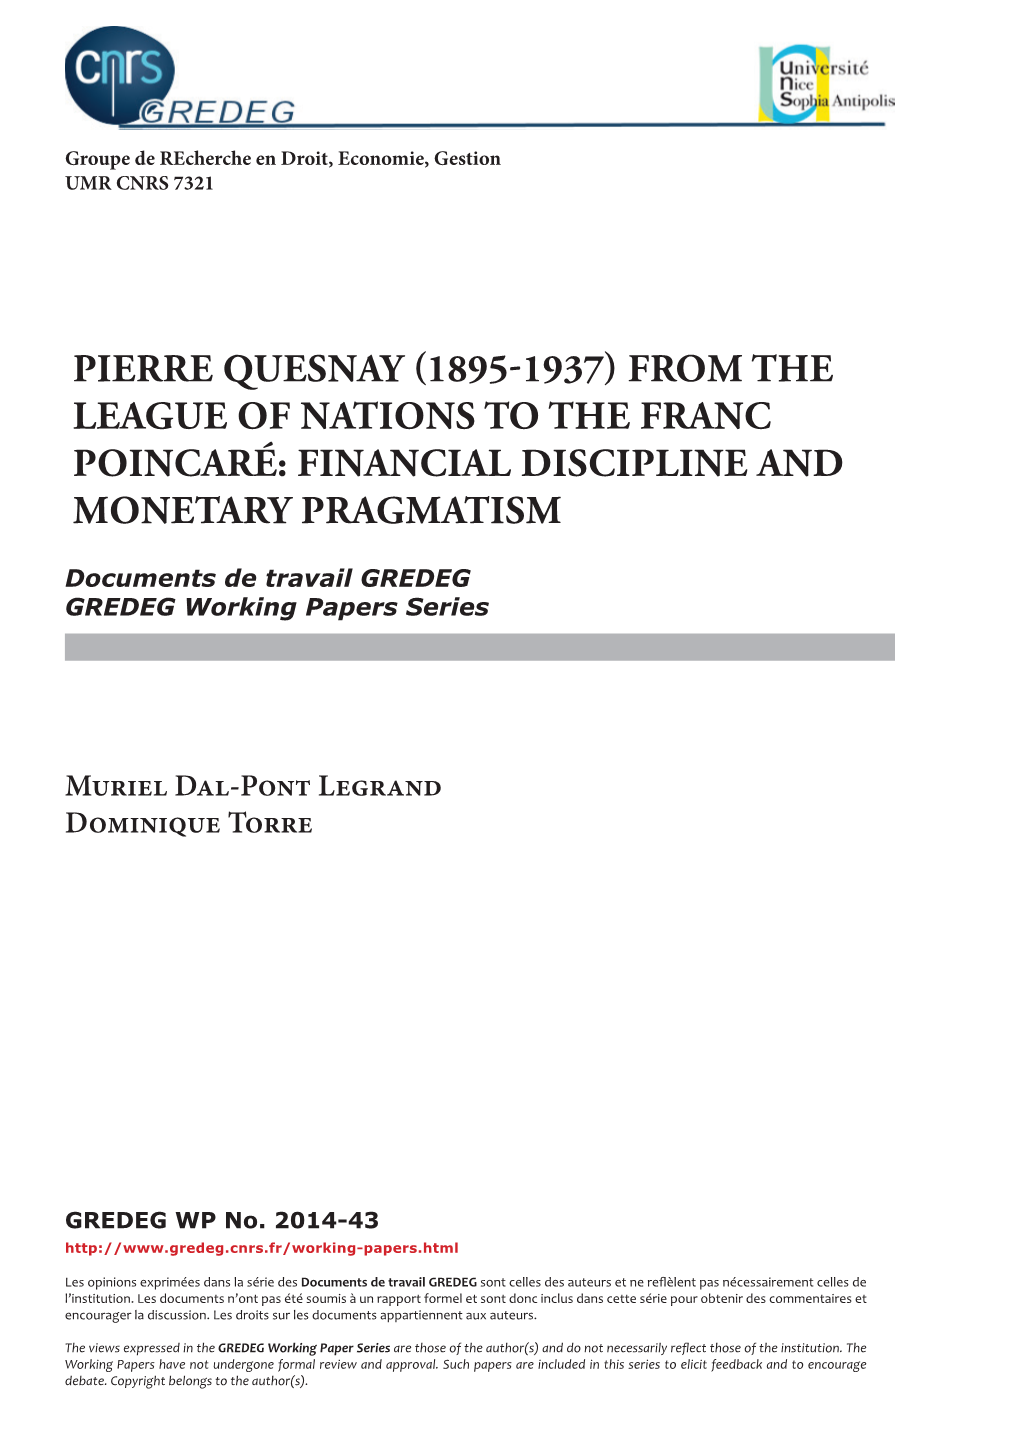 (1895-1937) from the League of Nations to the Franc Poincaré: Financial Discipline and Monetary Pragmatism